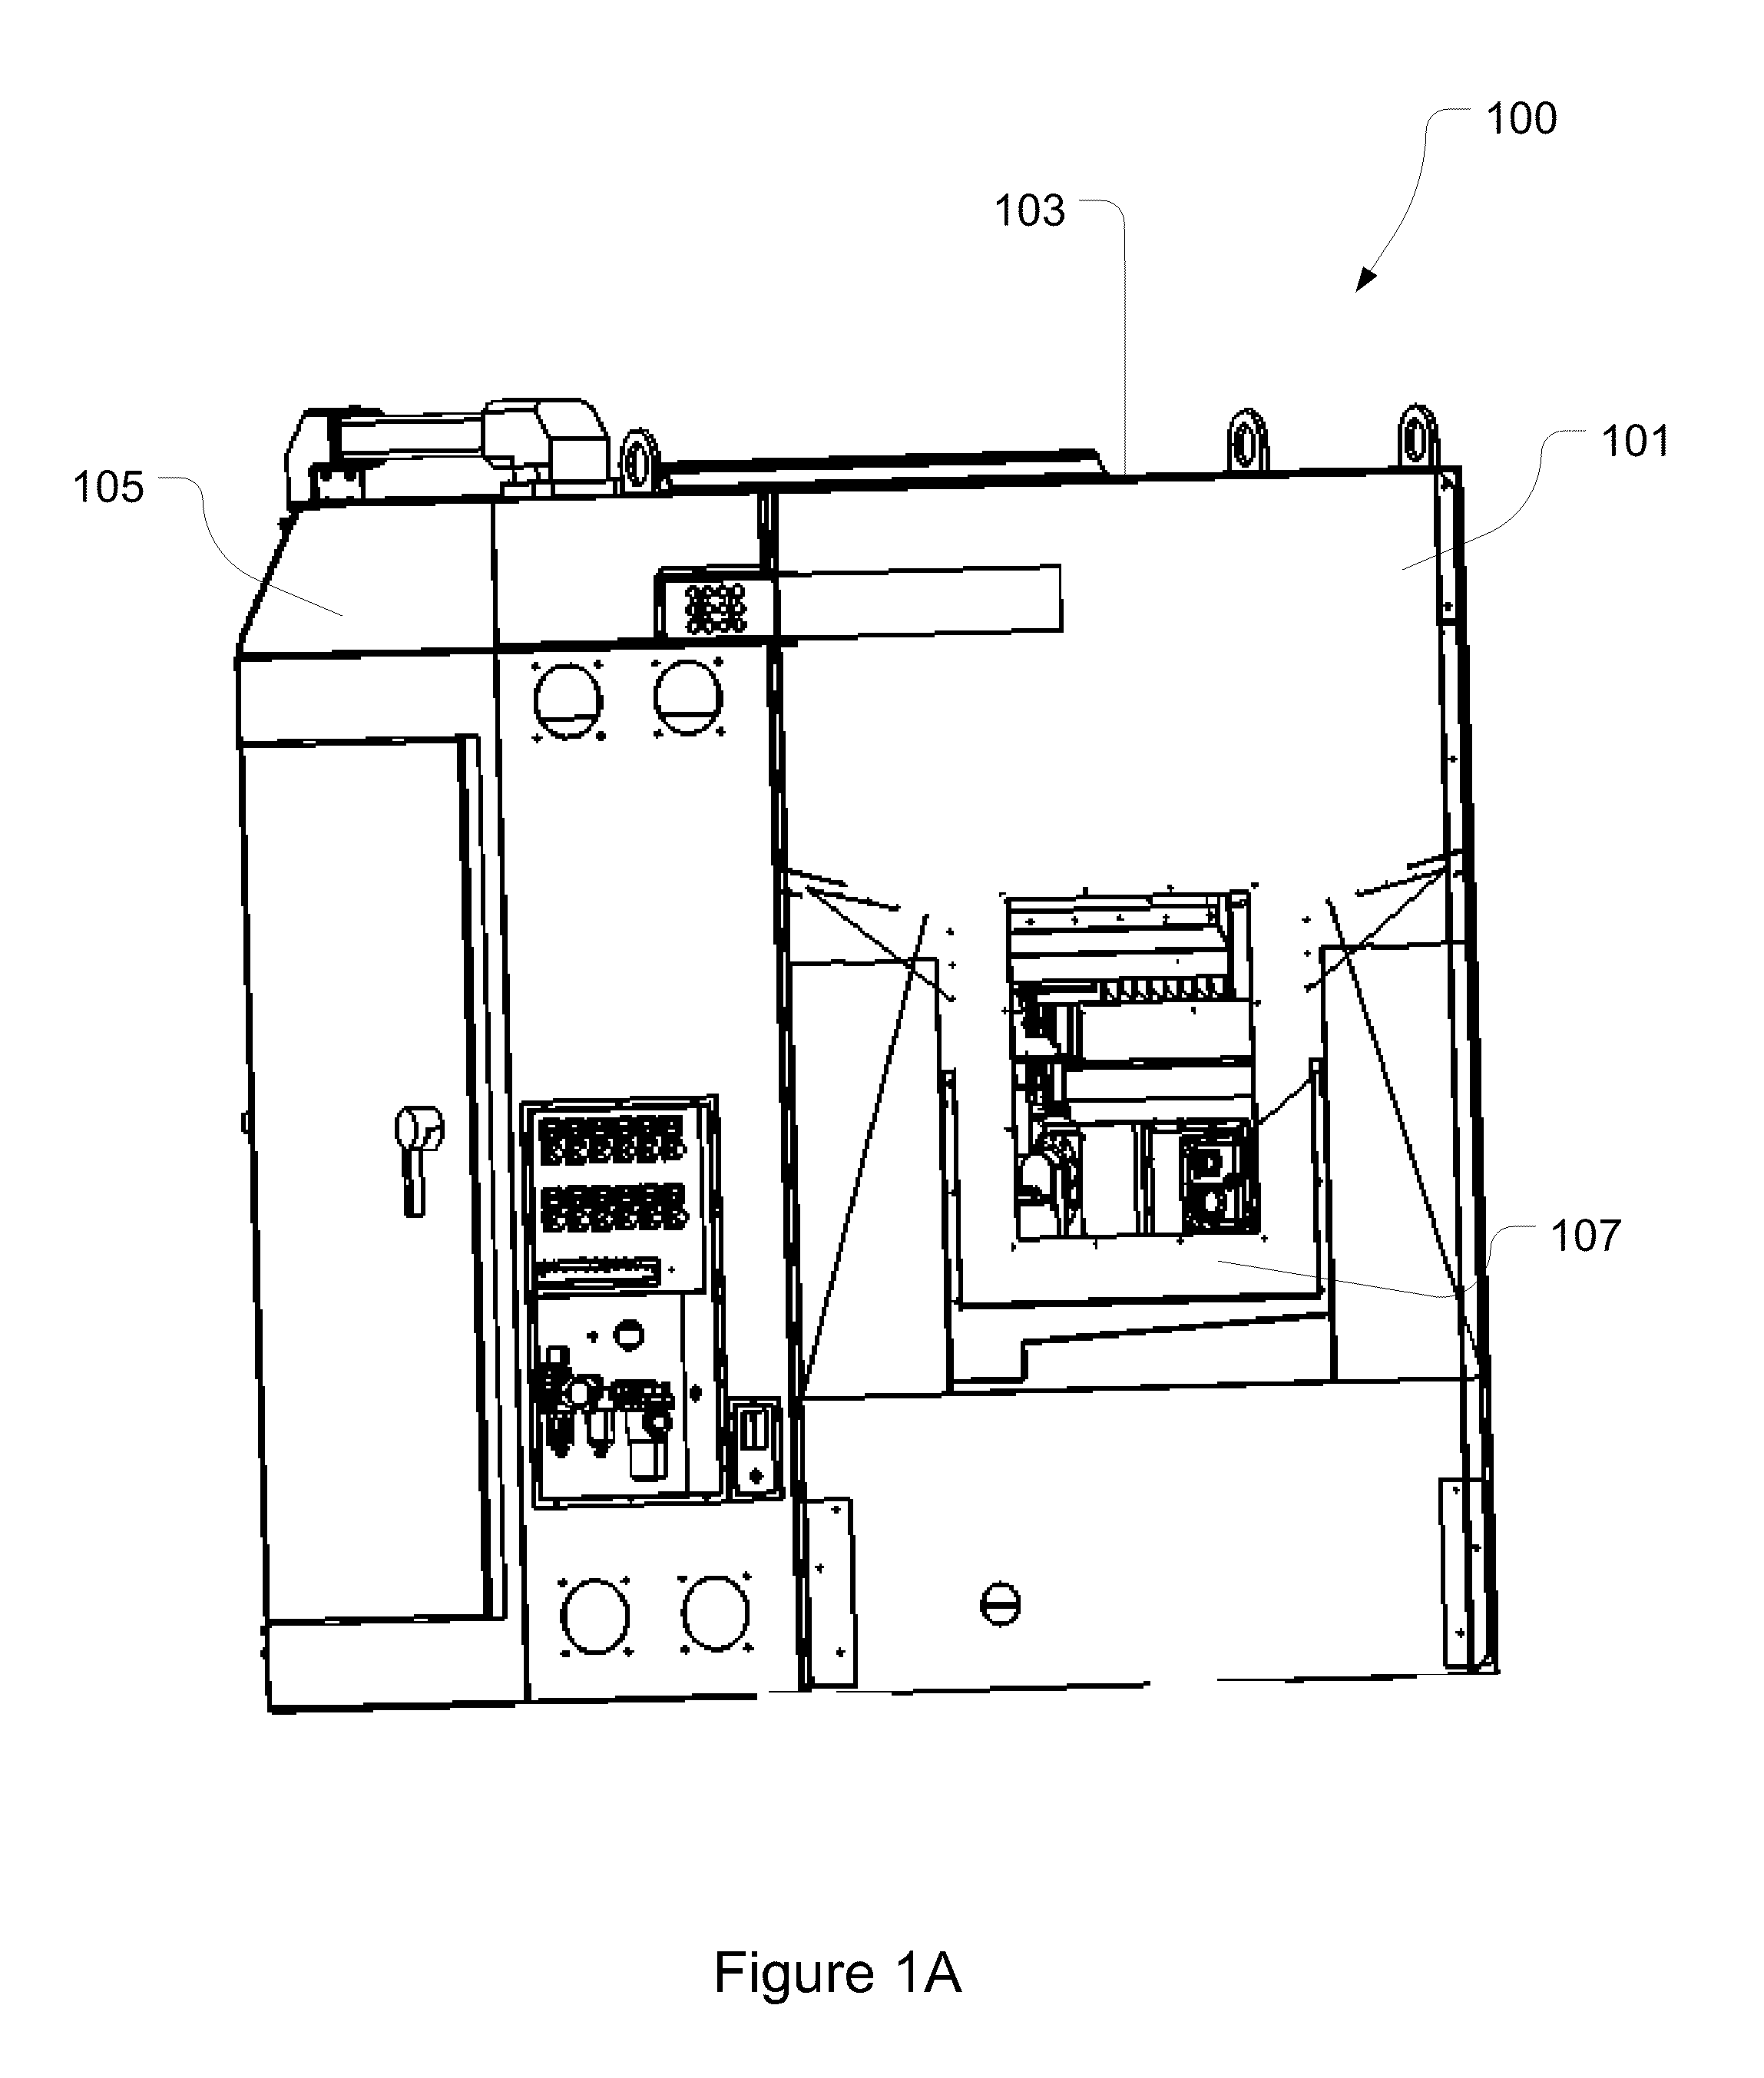 Machine Tool with Automatic Tool Changer